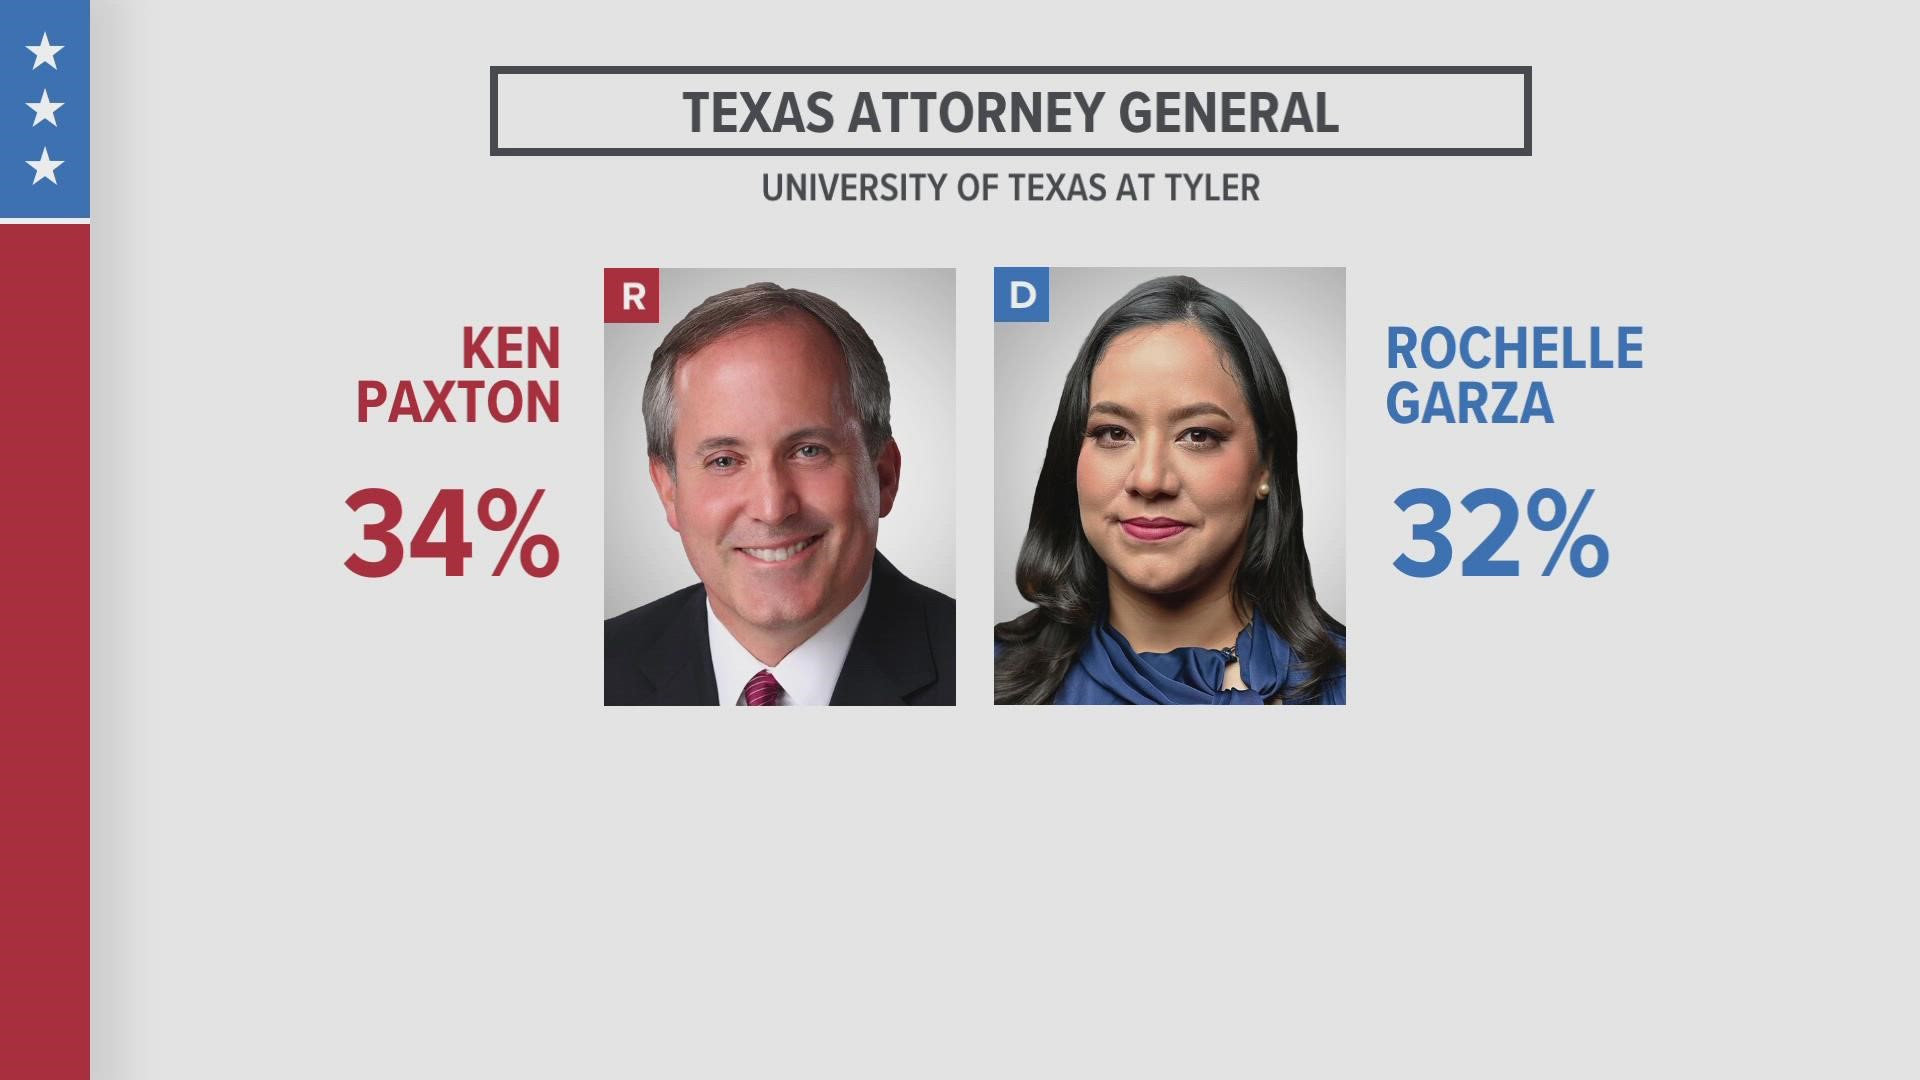 It looks like it's going to be a tight race between Paxton and Garza in November.